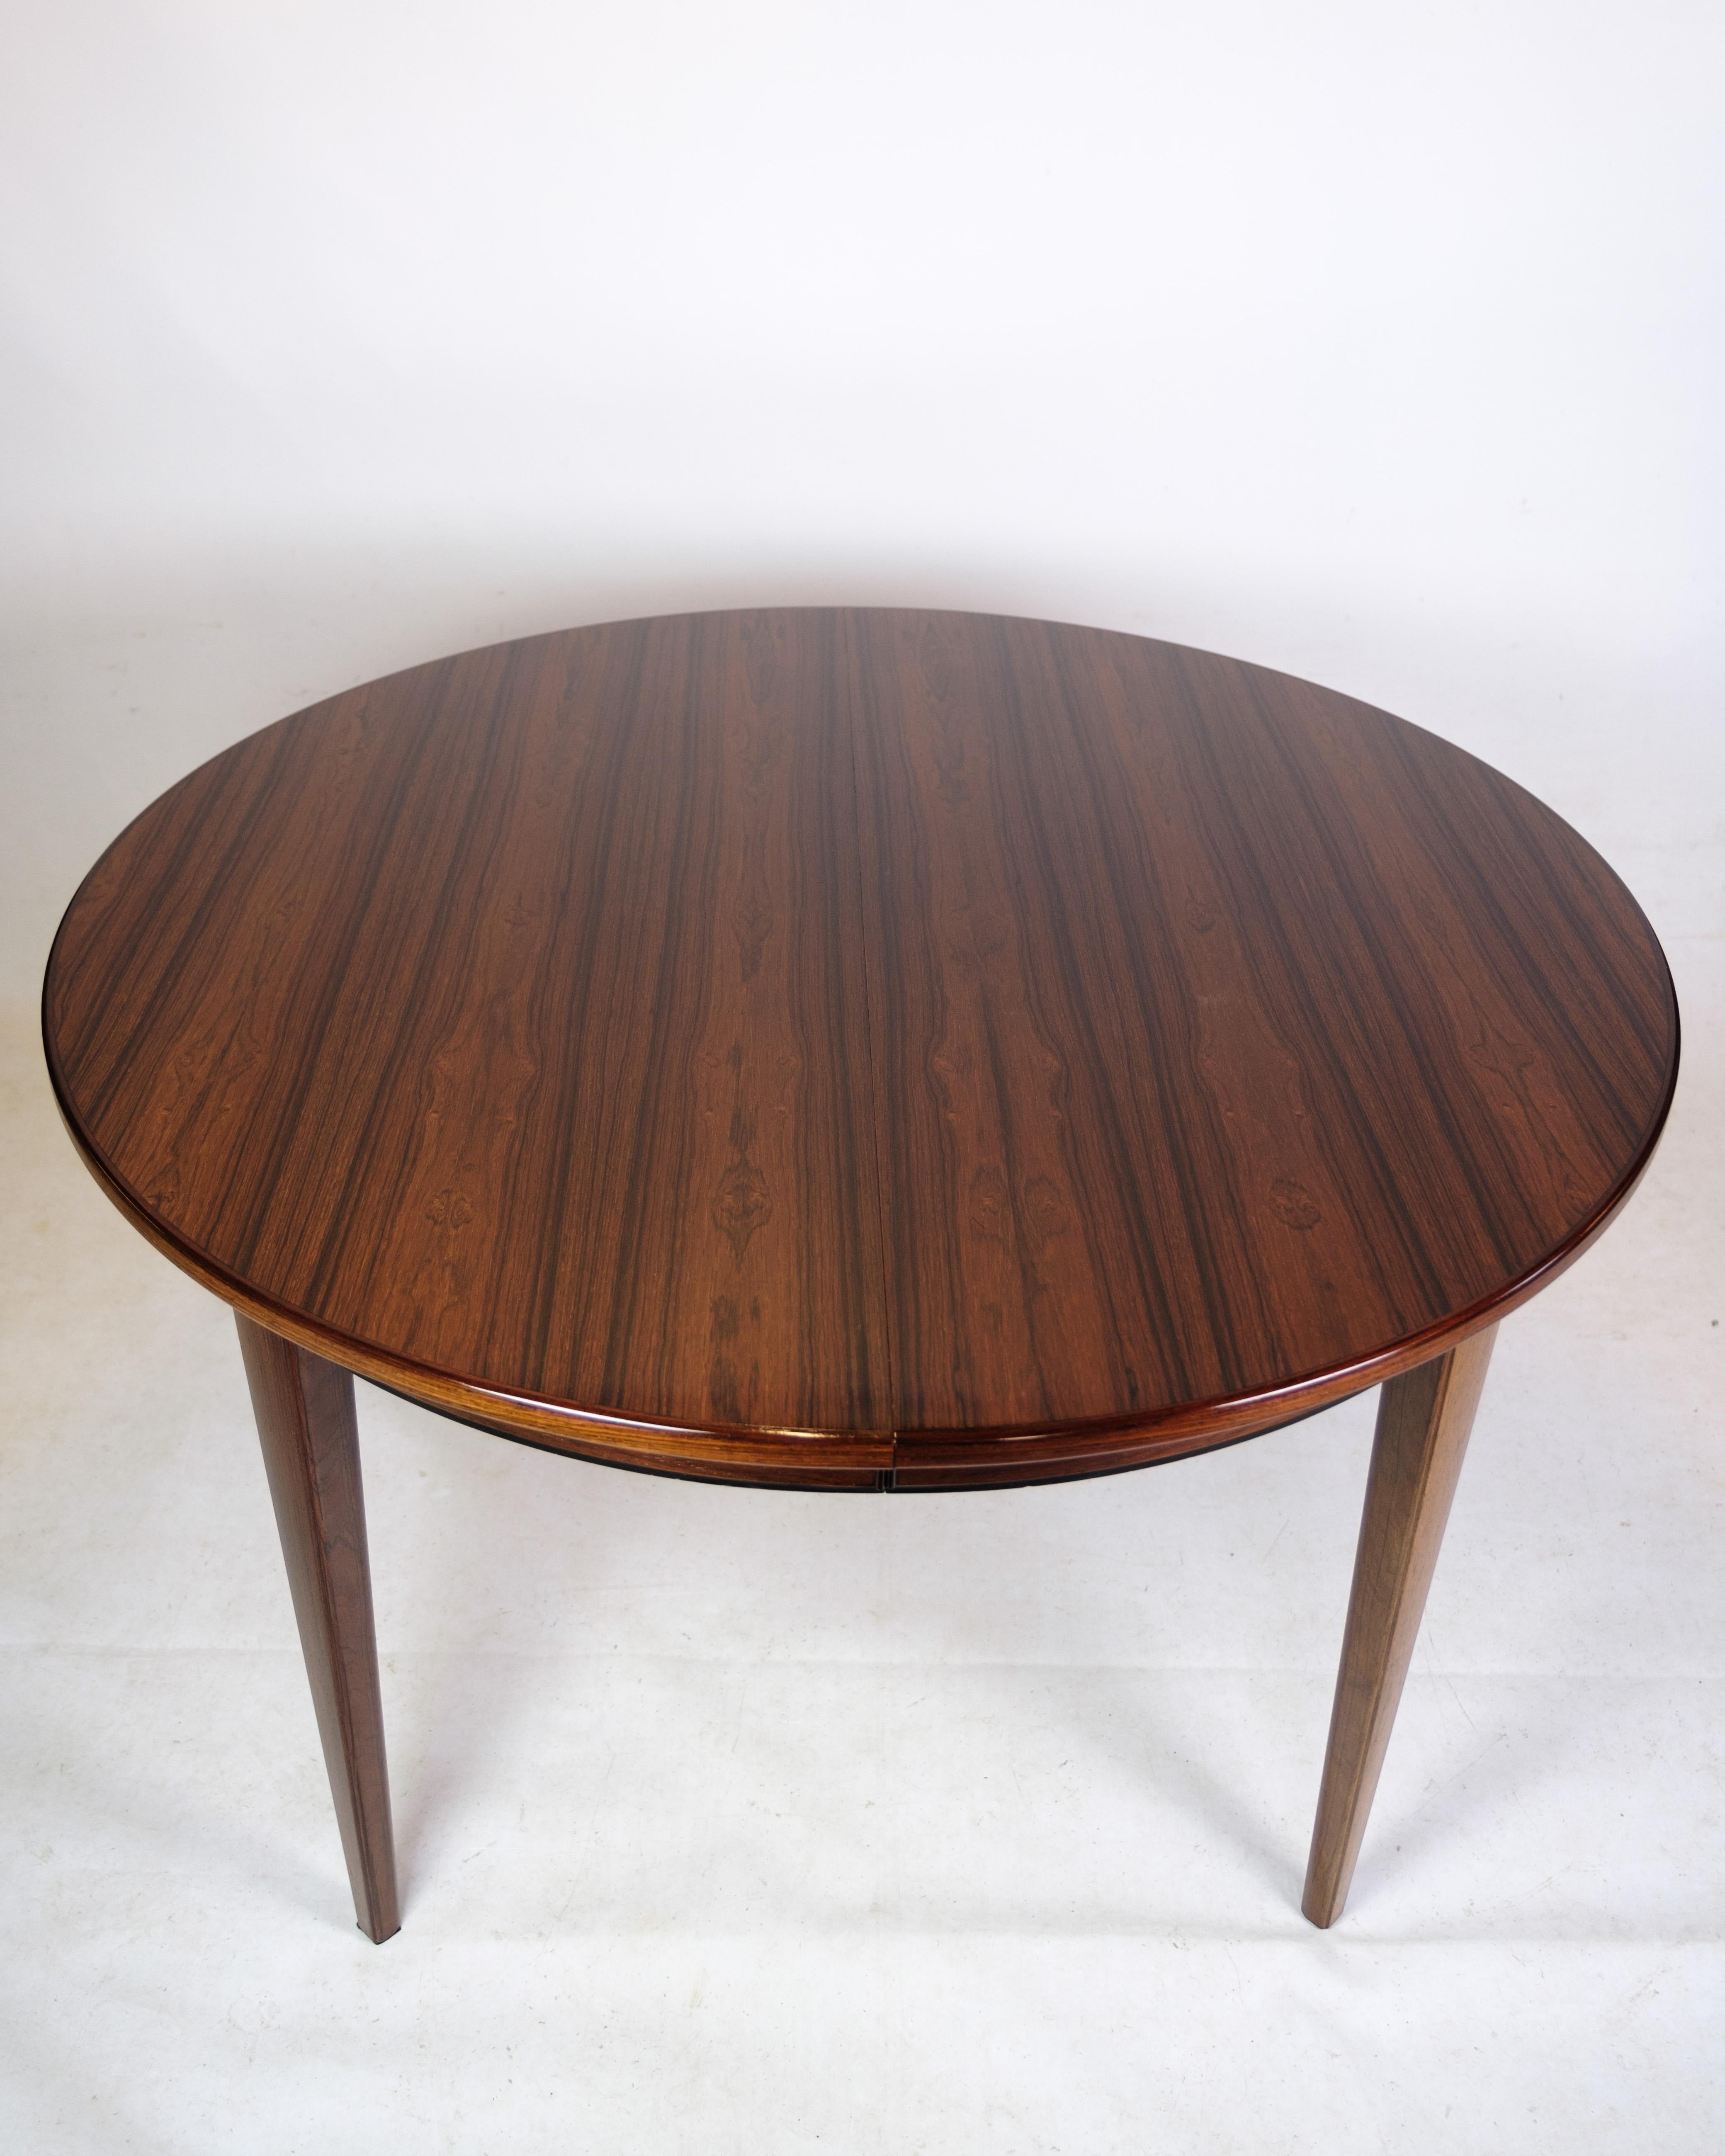 Scandinavian Modern Dining Table in Rosewood Model 55 By Omann Junior From 1960's For Sale